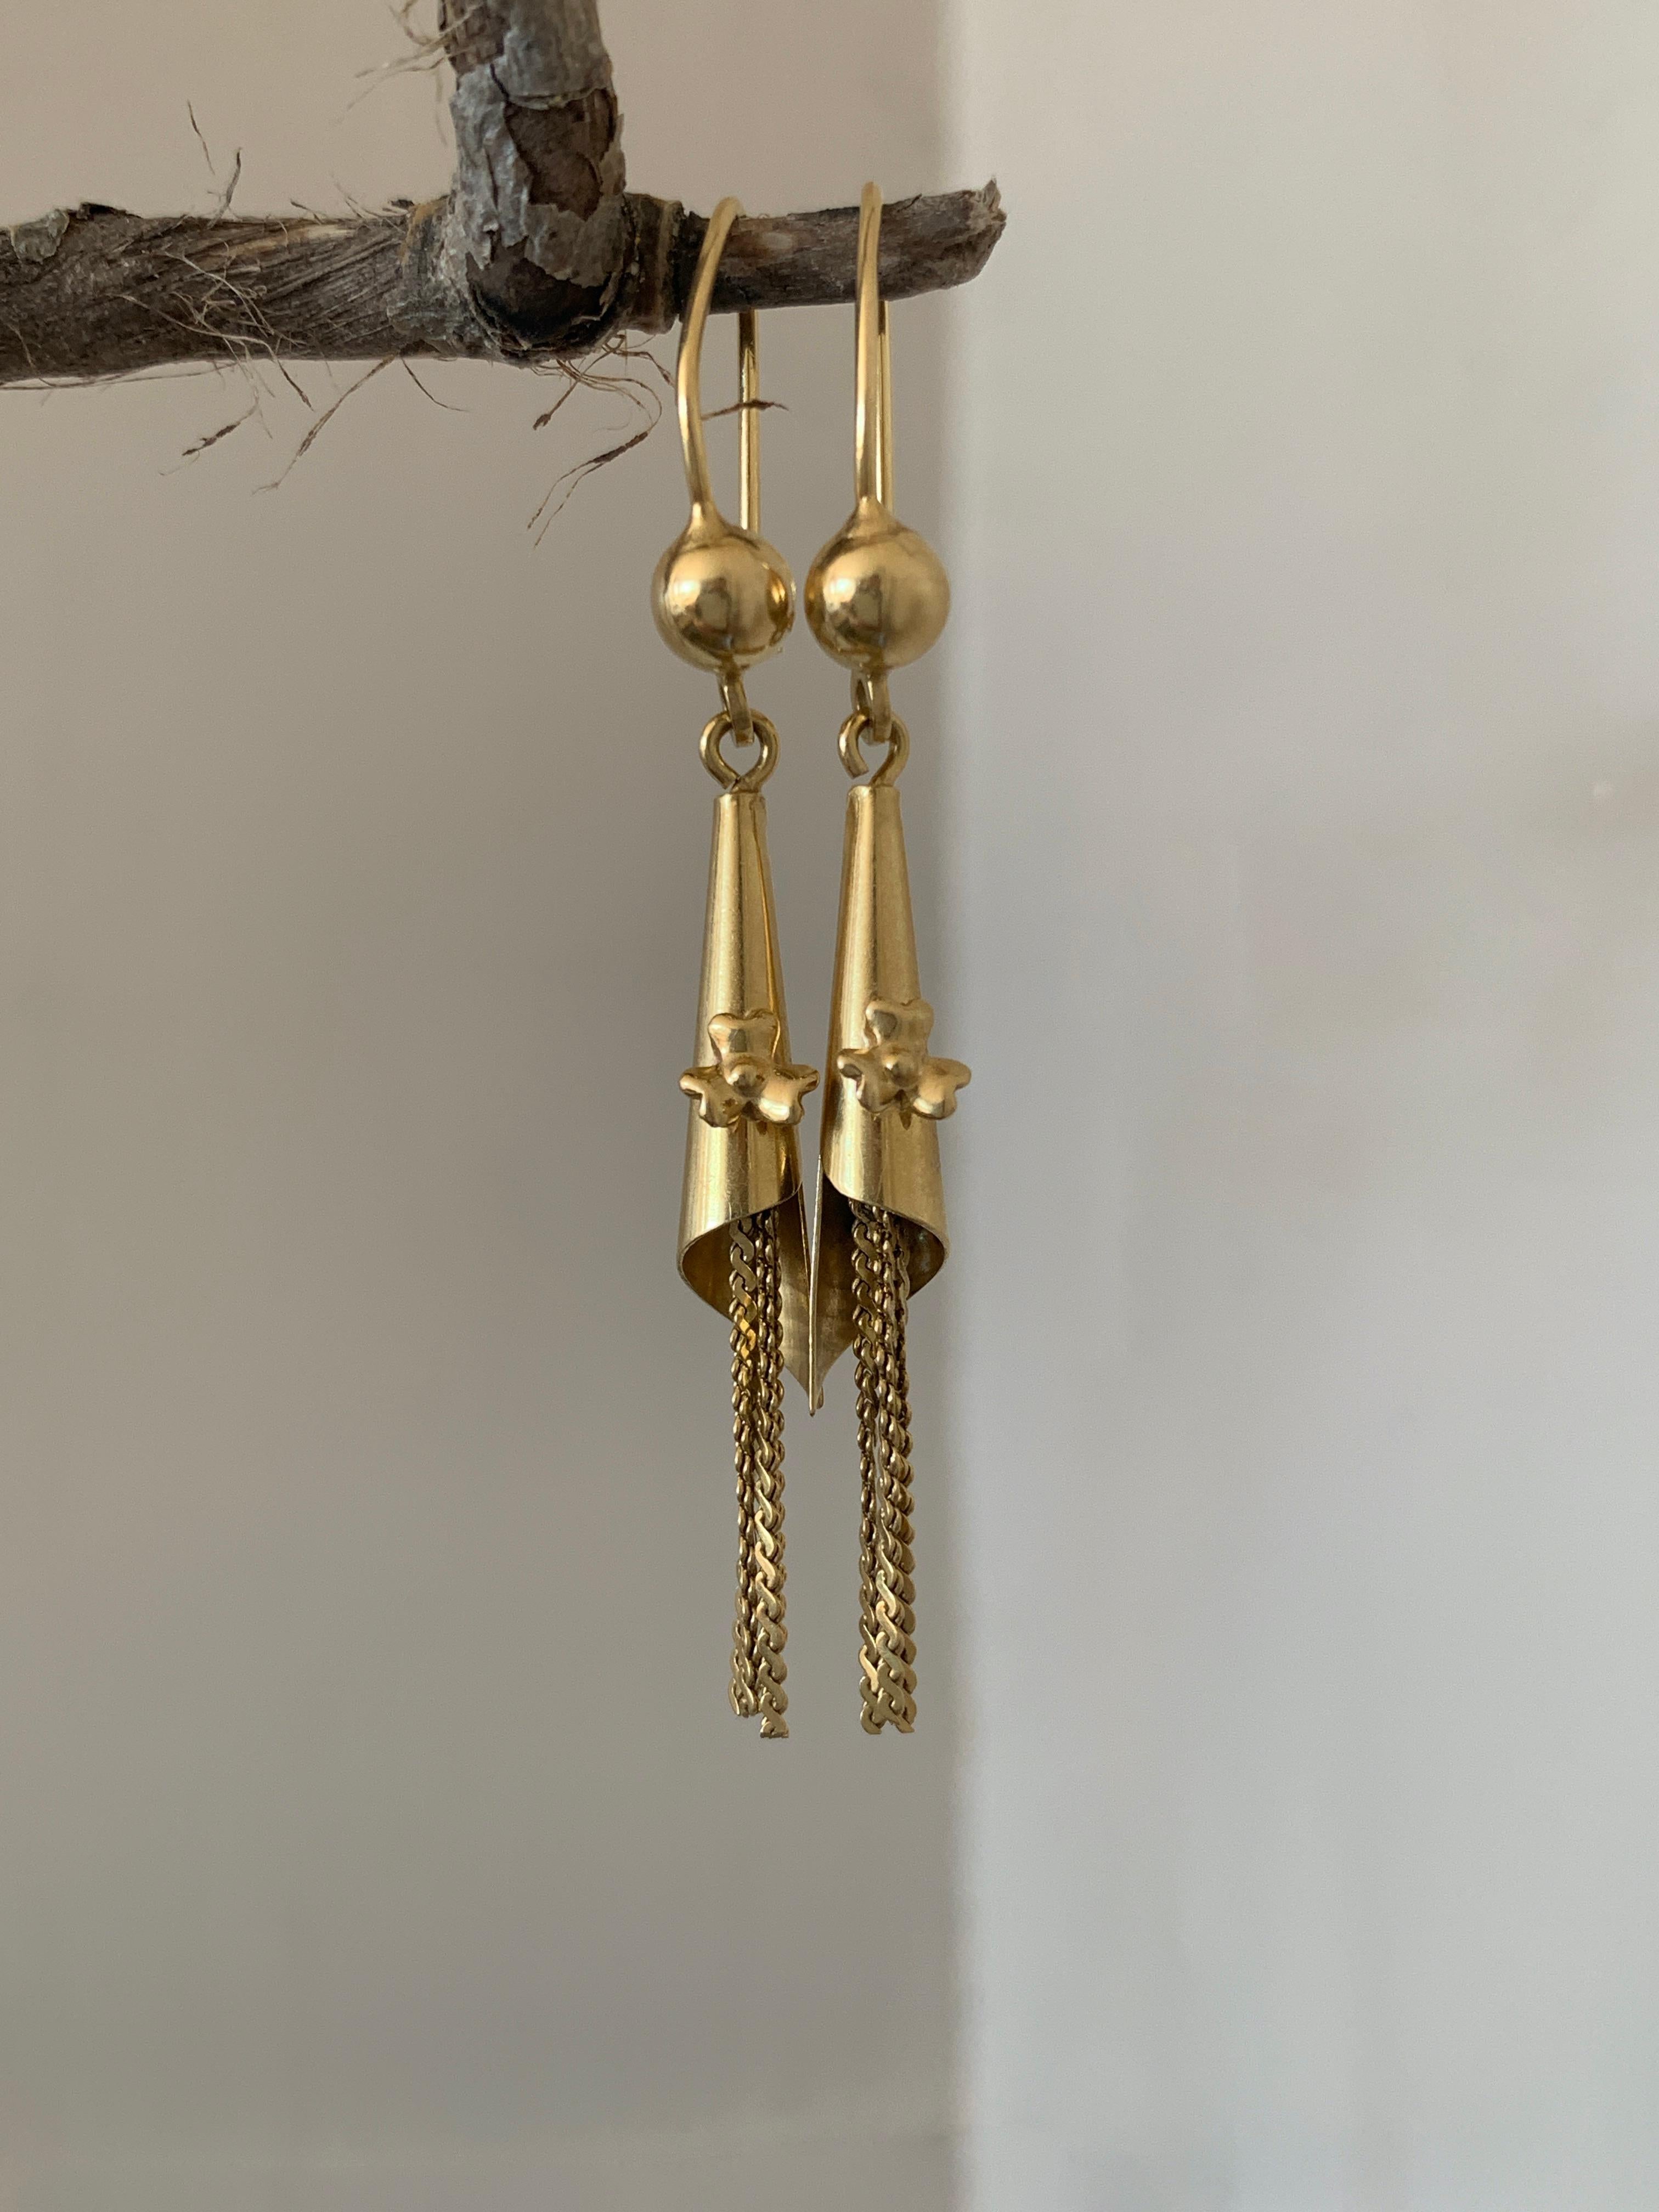 18ct 750 Gold Earrings
Design is clearly inspired by the Circus
Cones with dangling cones 
topped by front bows
offer a fun appeal 
Italian stamps Star 32 AR 1
and 750 on both 
Era 1970s